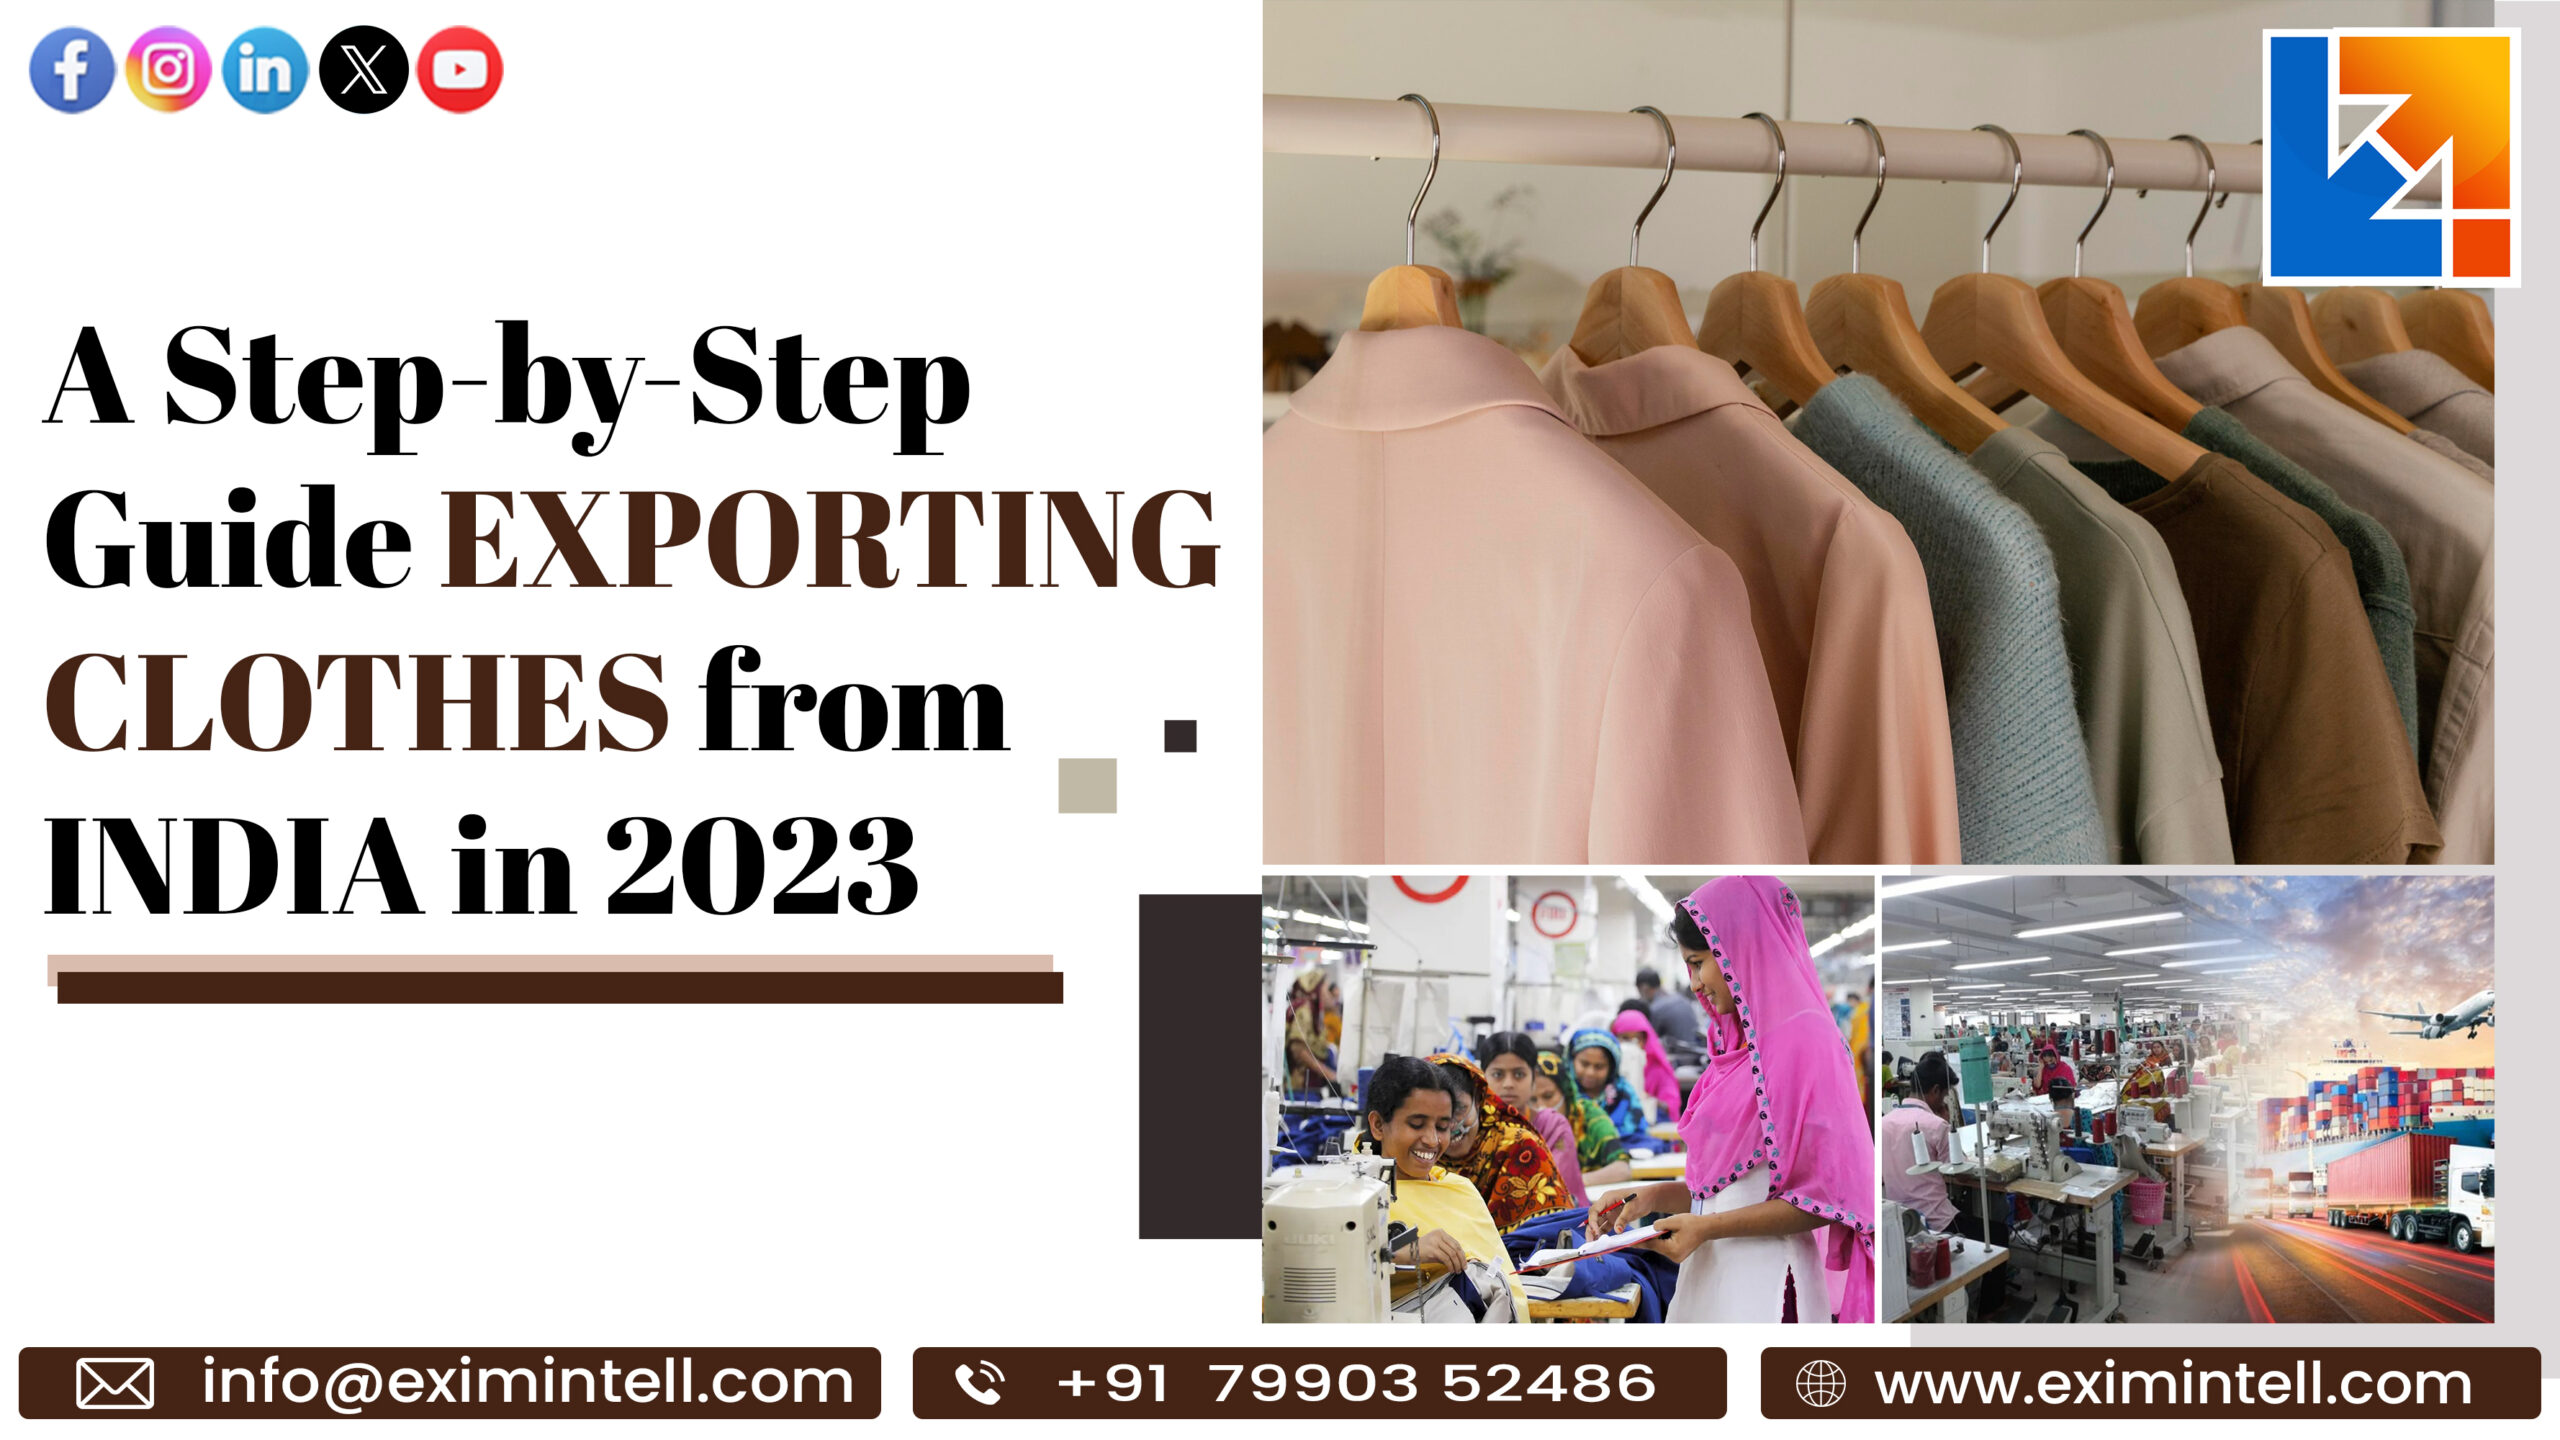 A Step-by-Step Guide: Exporting Clothes from India in 2023